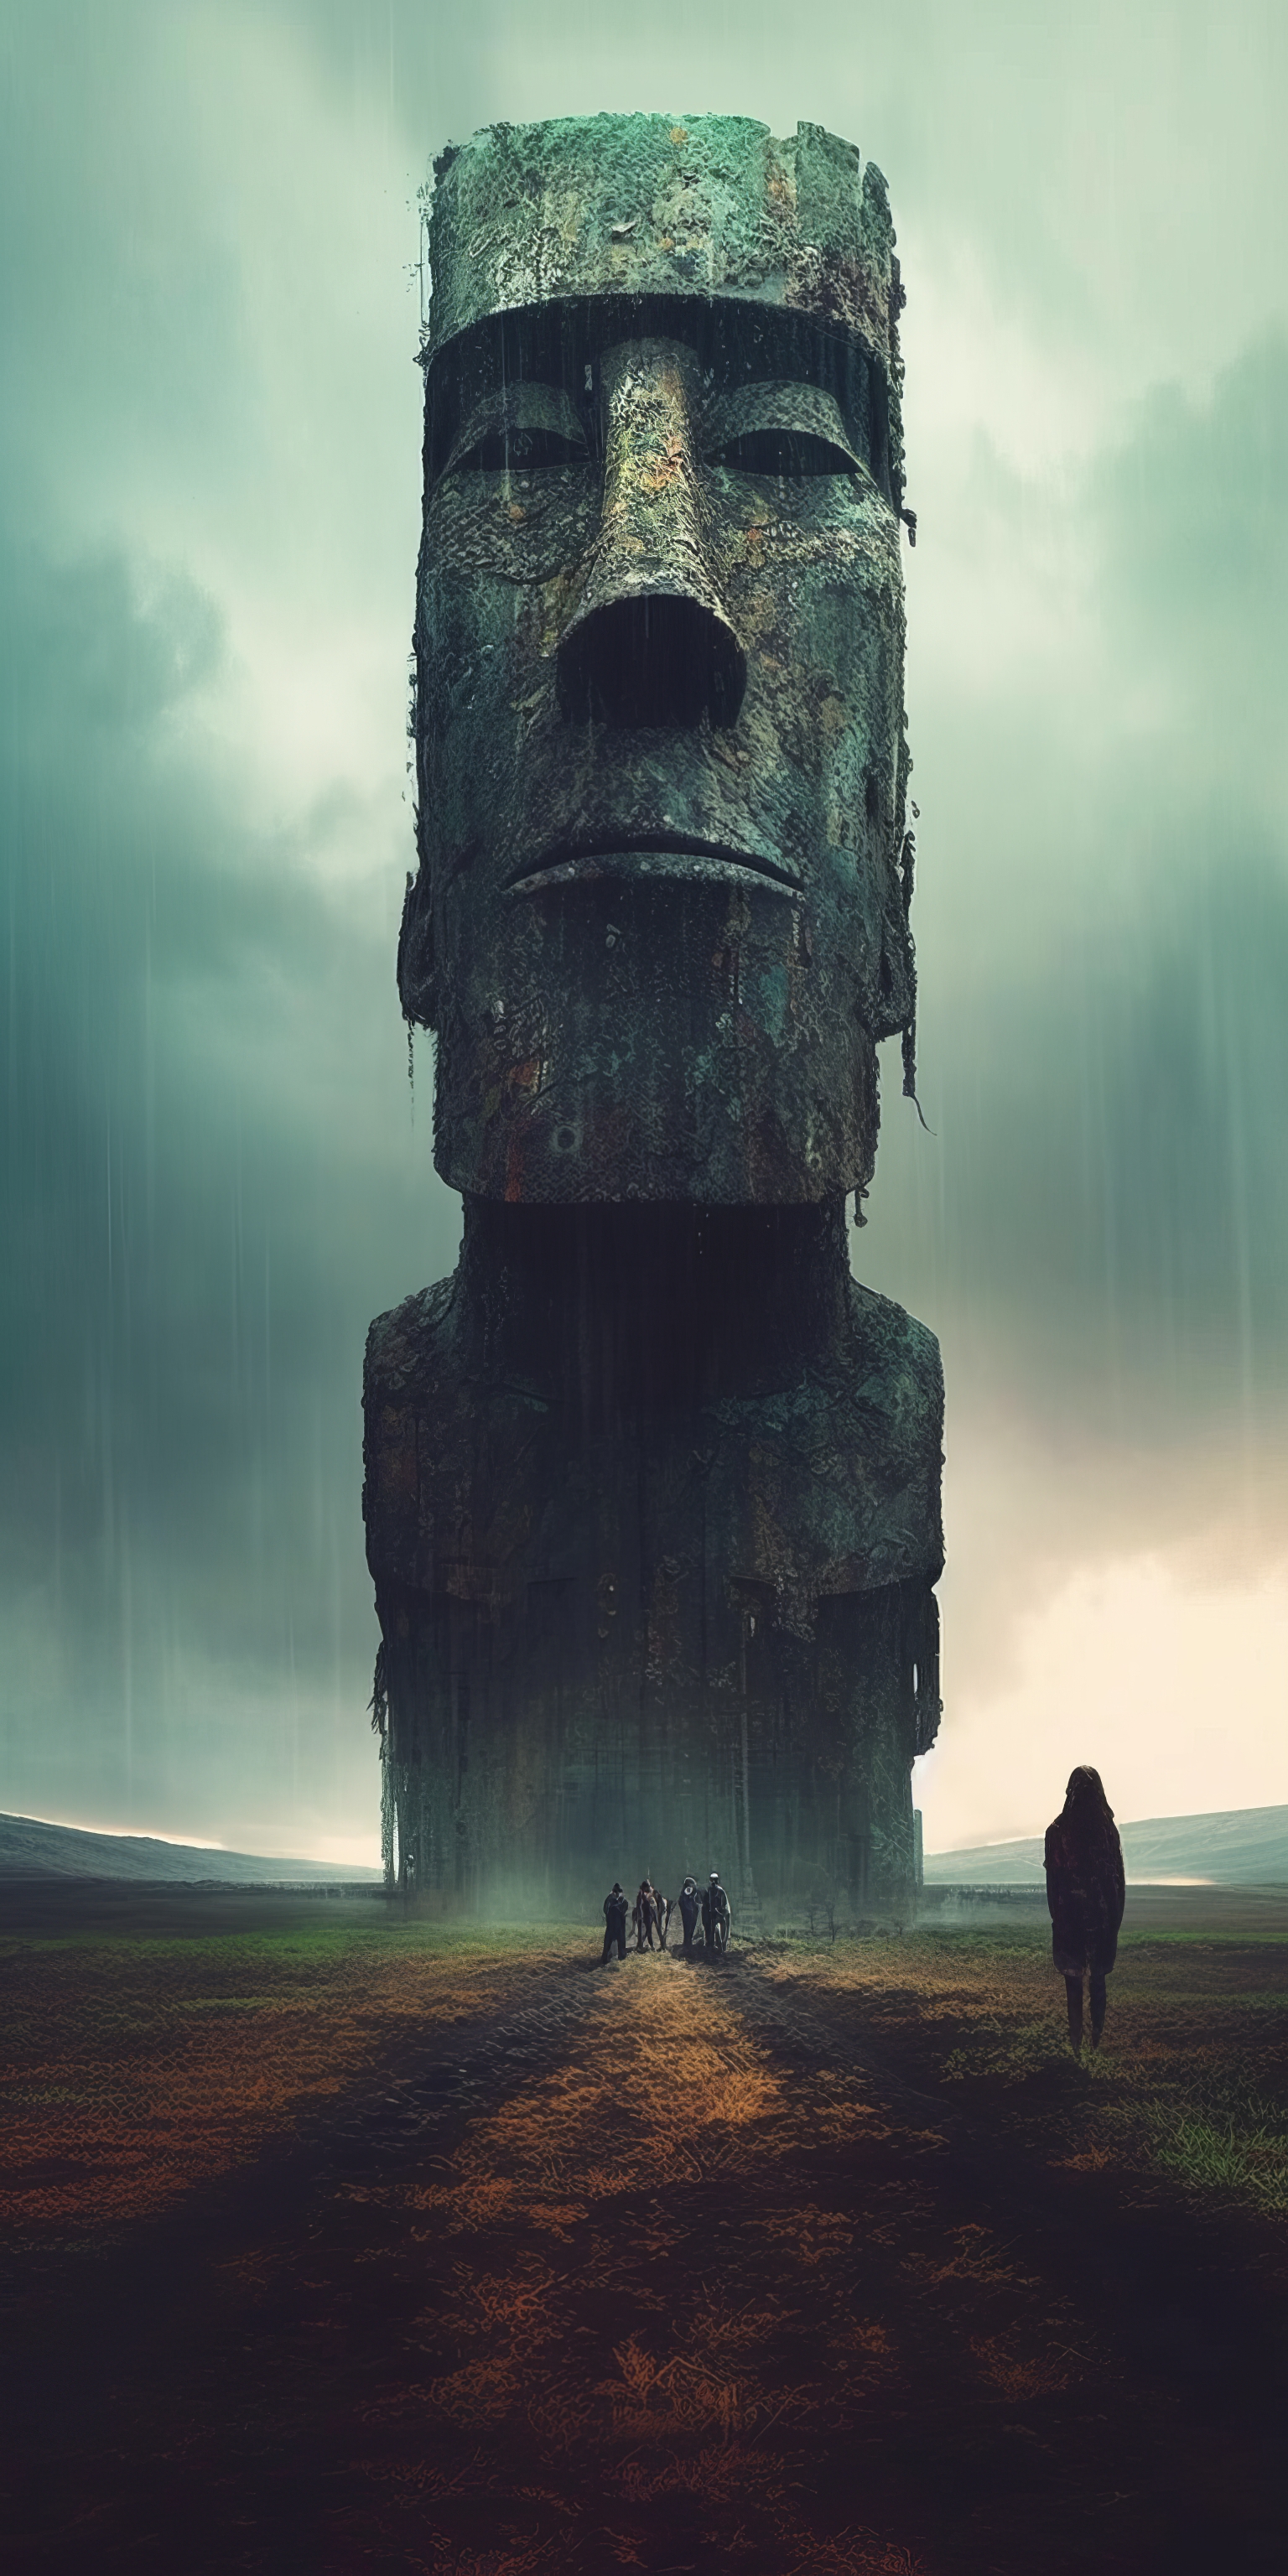 General 1536x3072 AI art portrait display Easter Island Moai illustration statue face frontal view sky clouds